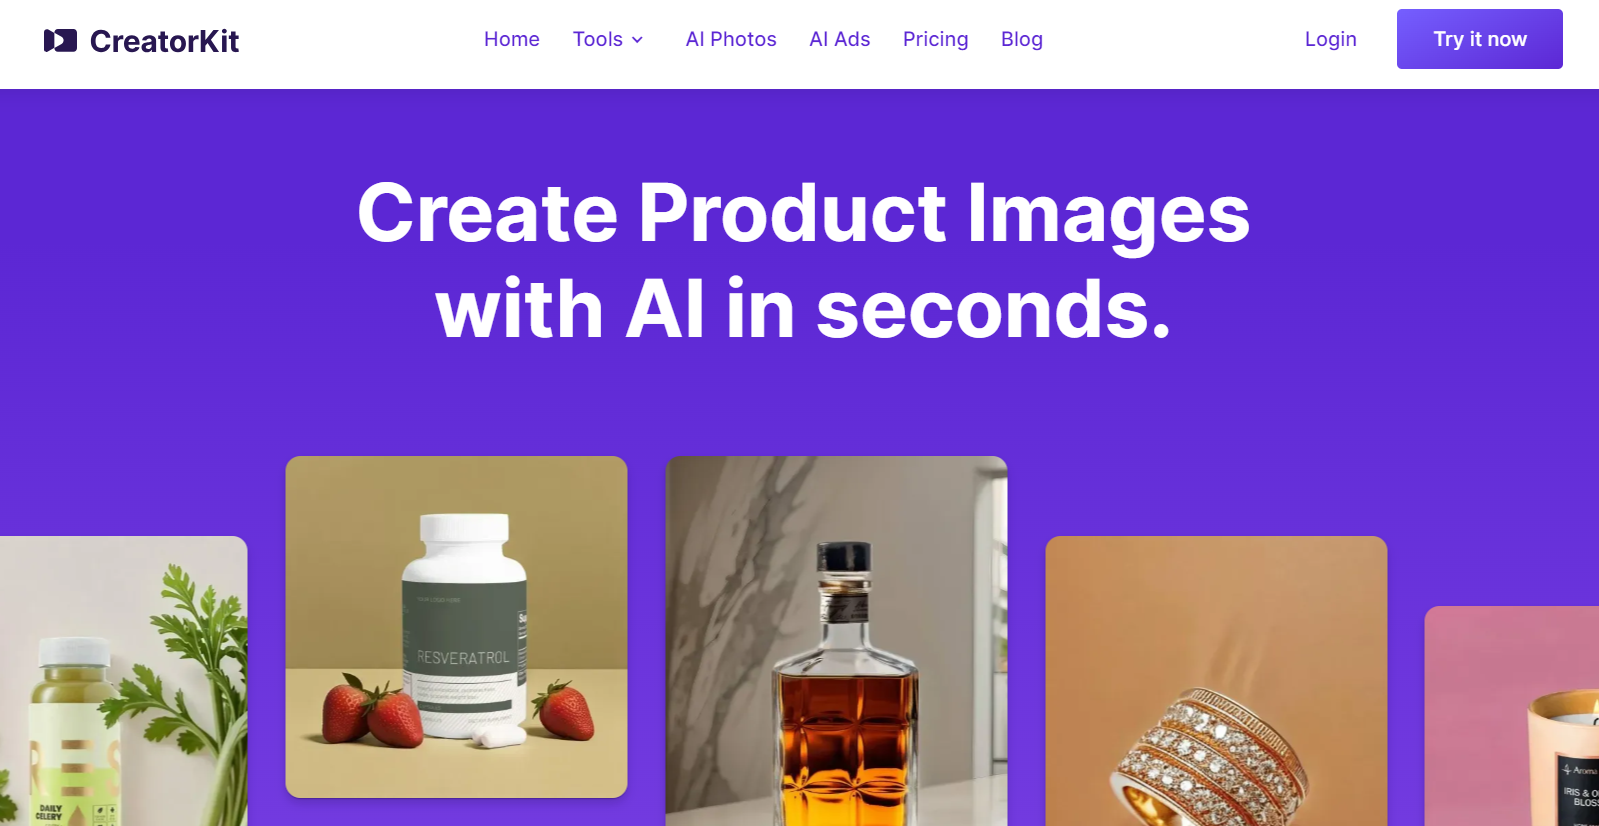 CreatorKit helps businesses create sample product images.